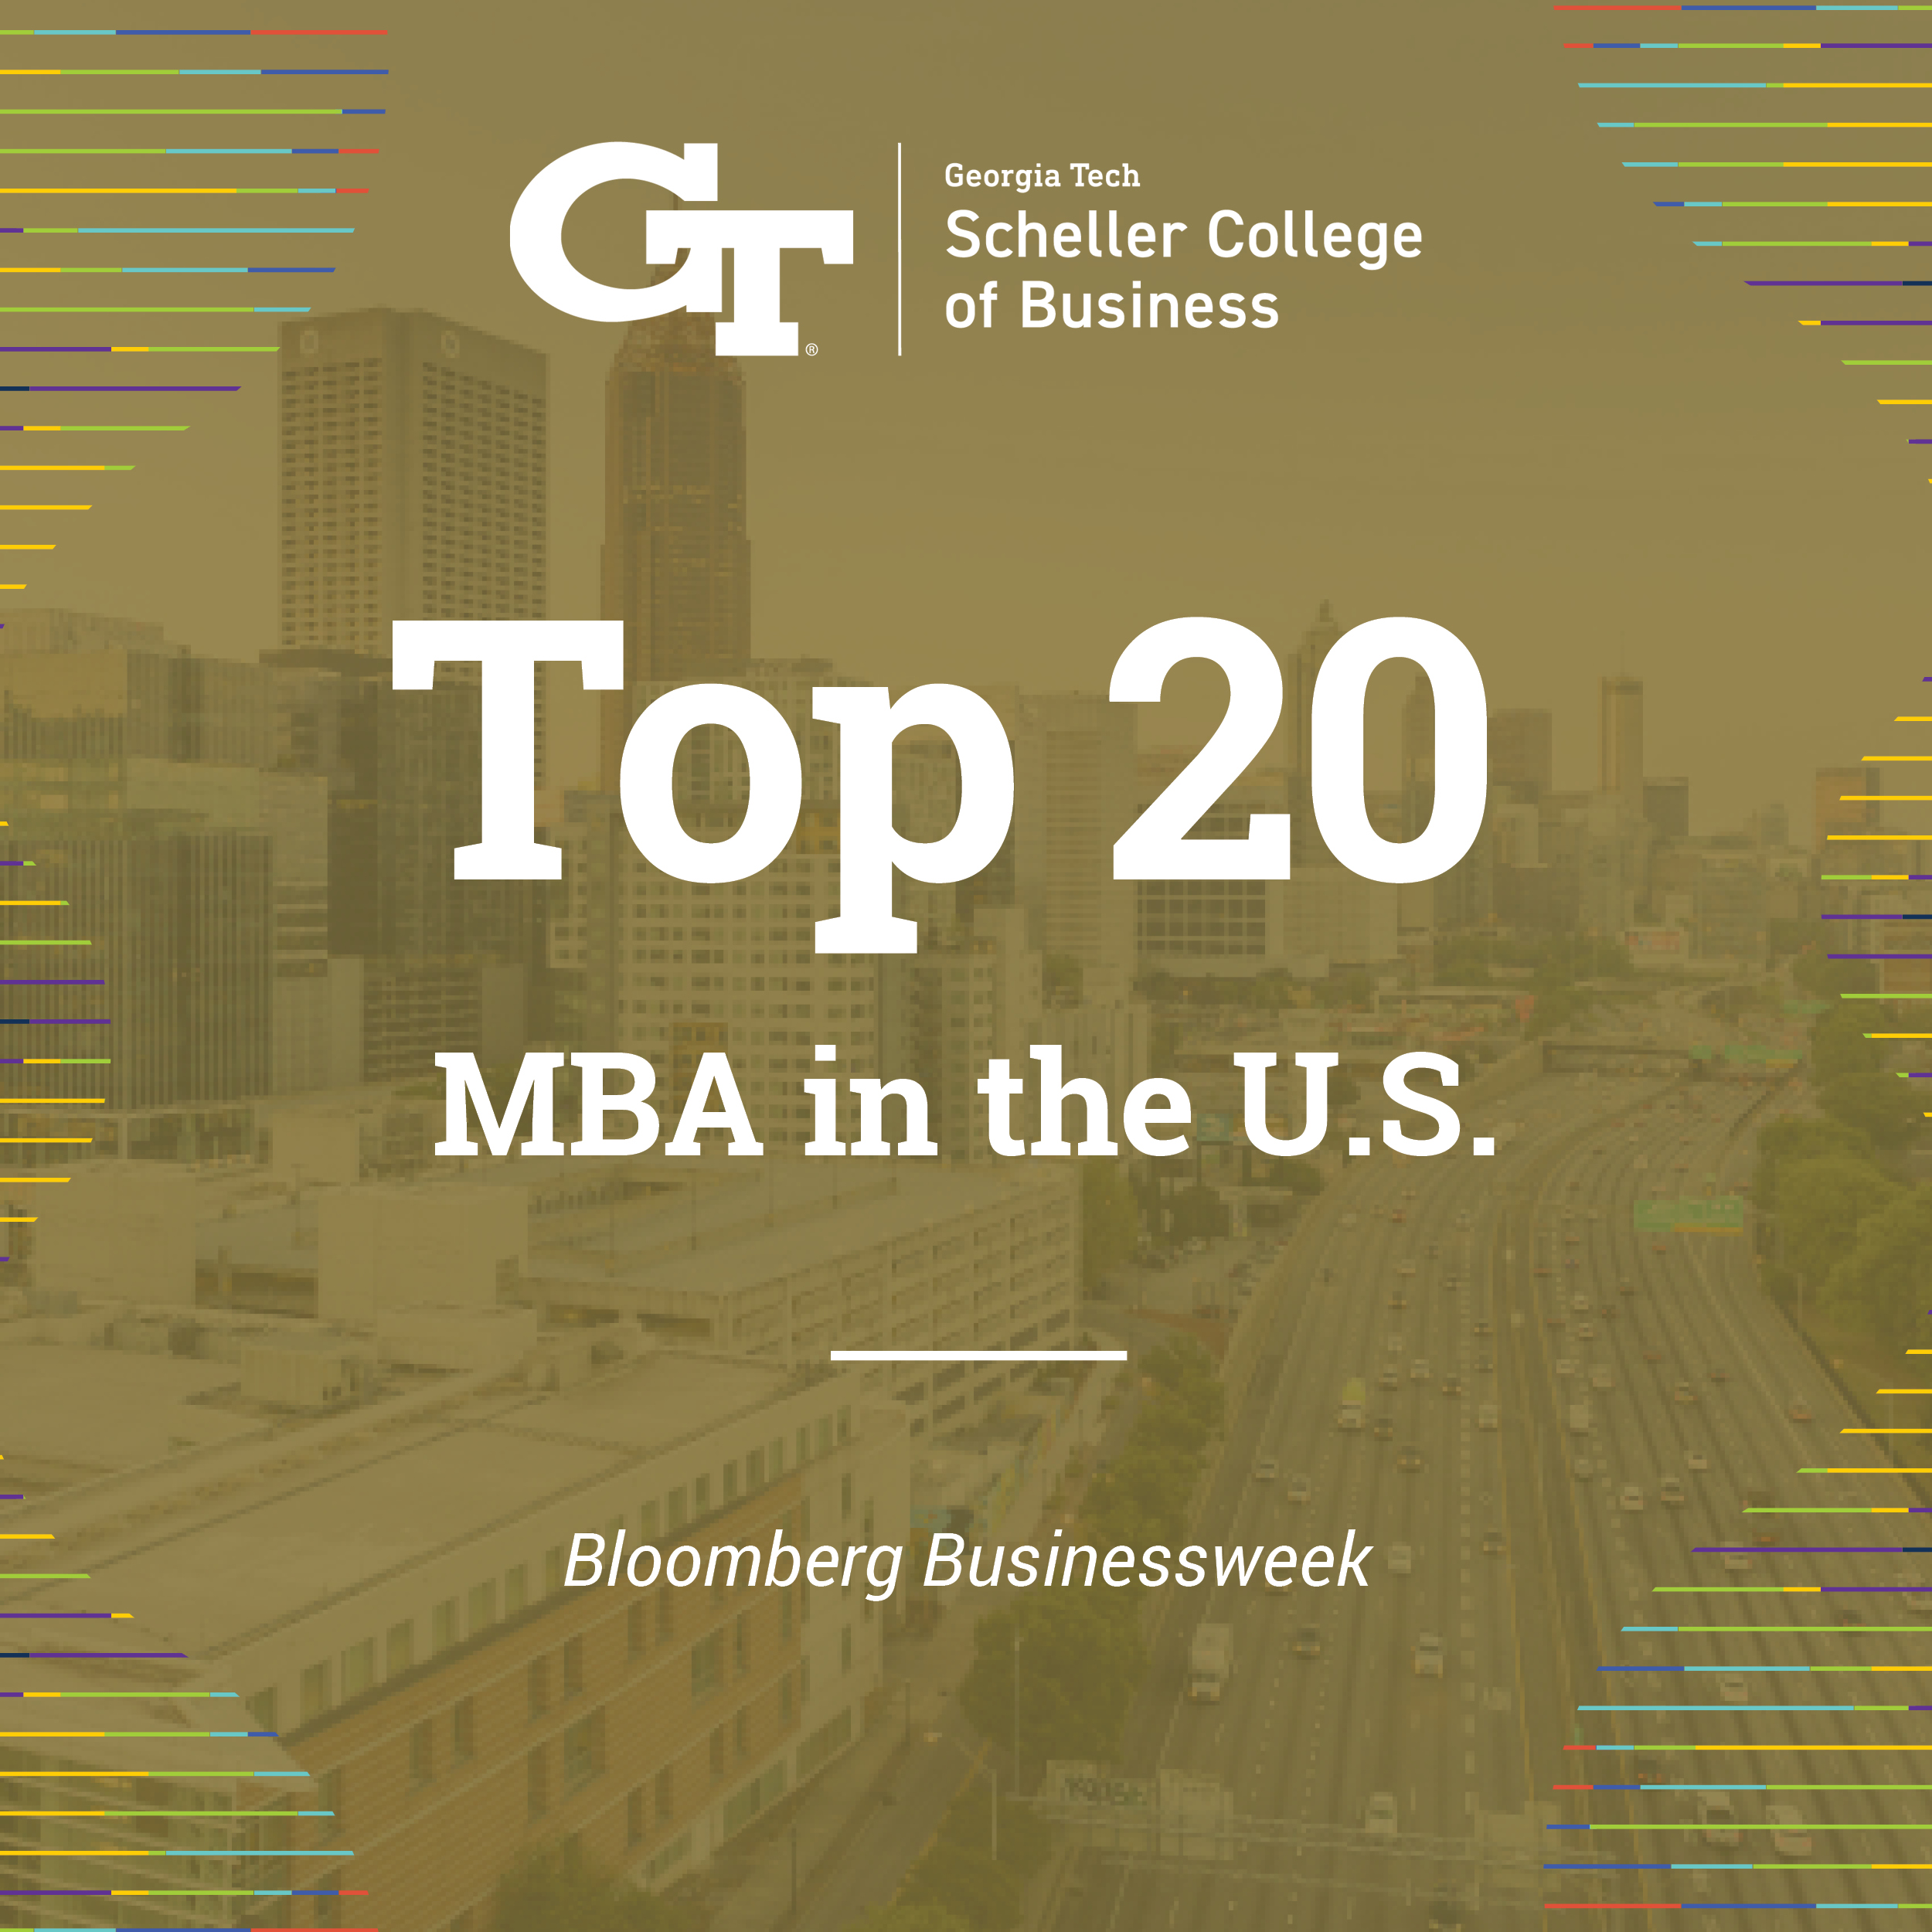 A graphic image showing "Top 20 MBA in the U.S. - Bloomberg Businessweek.” 